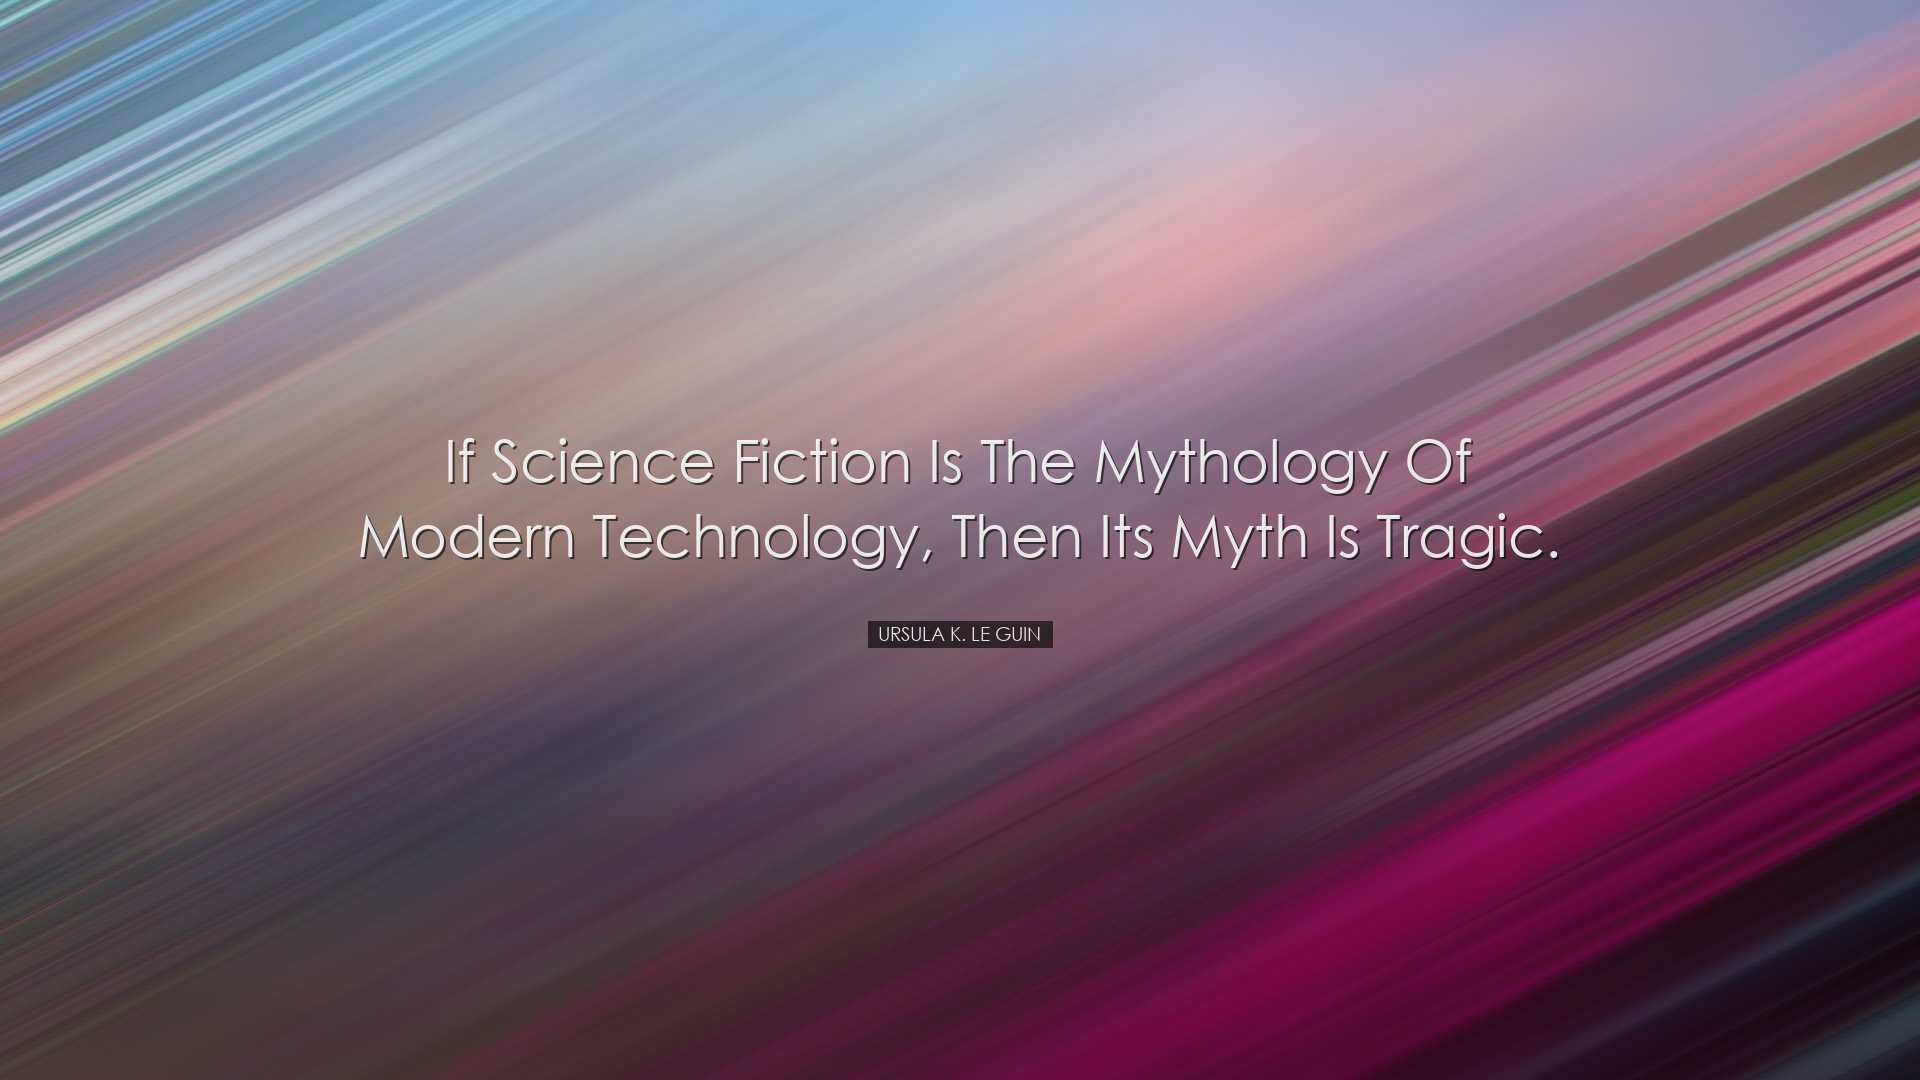 If science fiction is the mythology of modern technology, then its